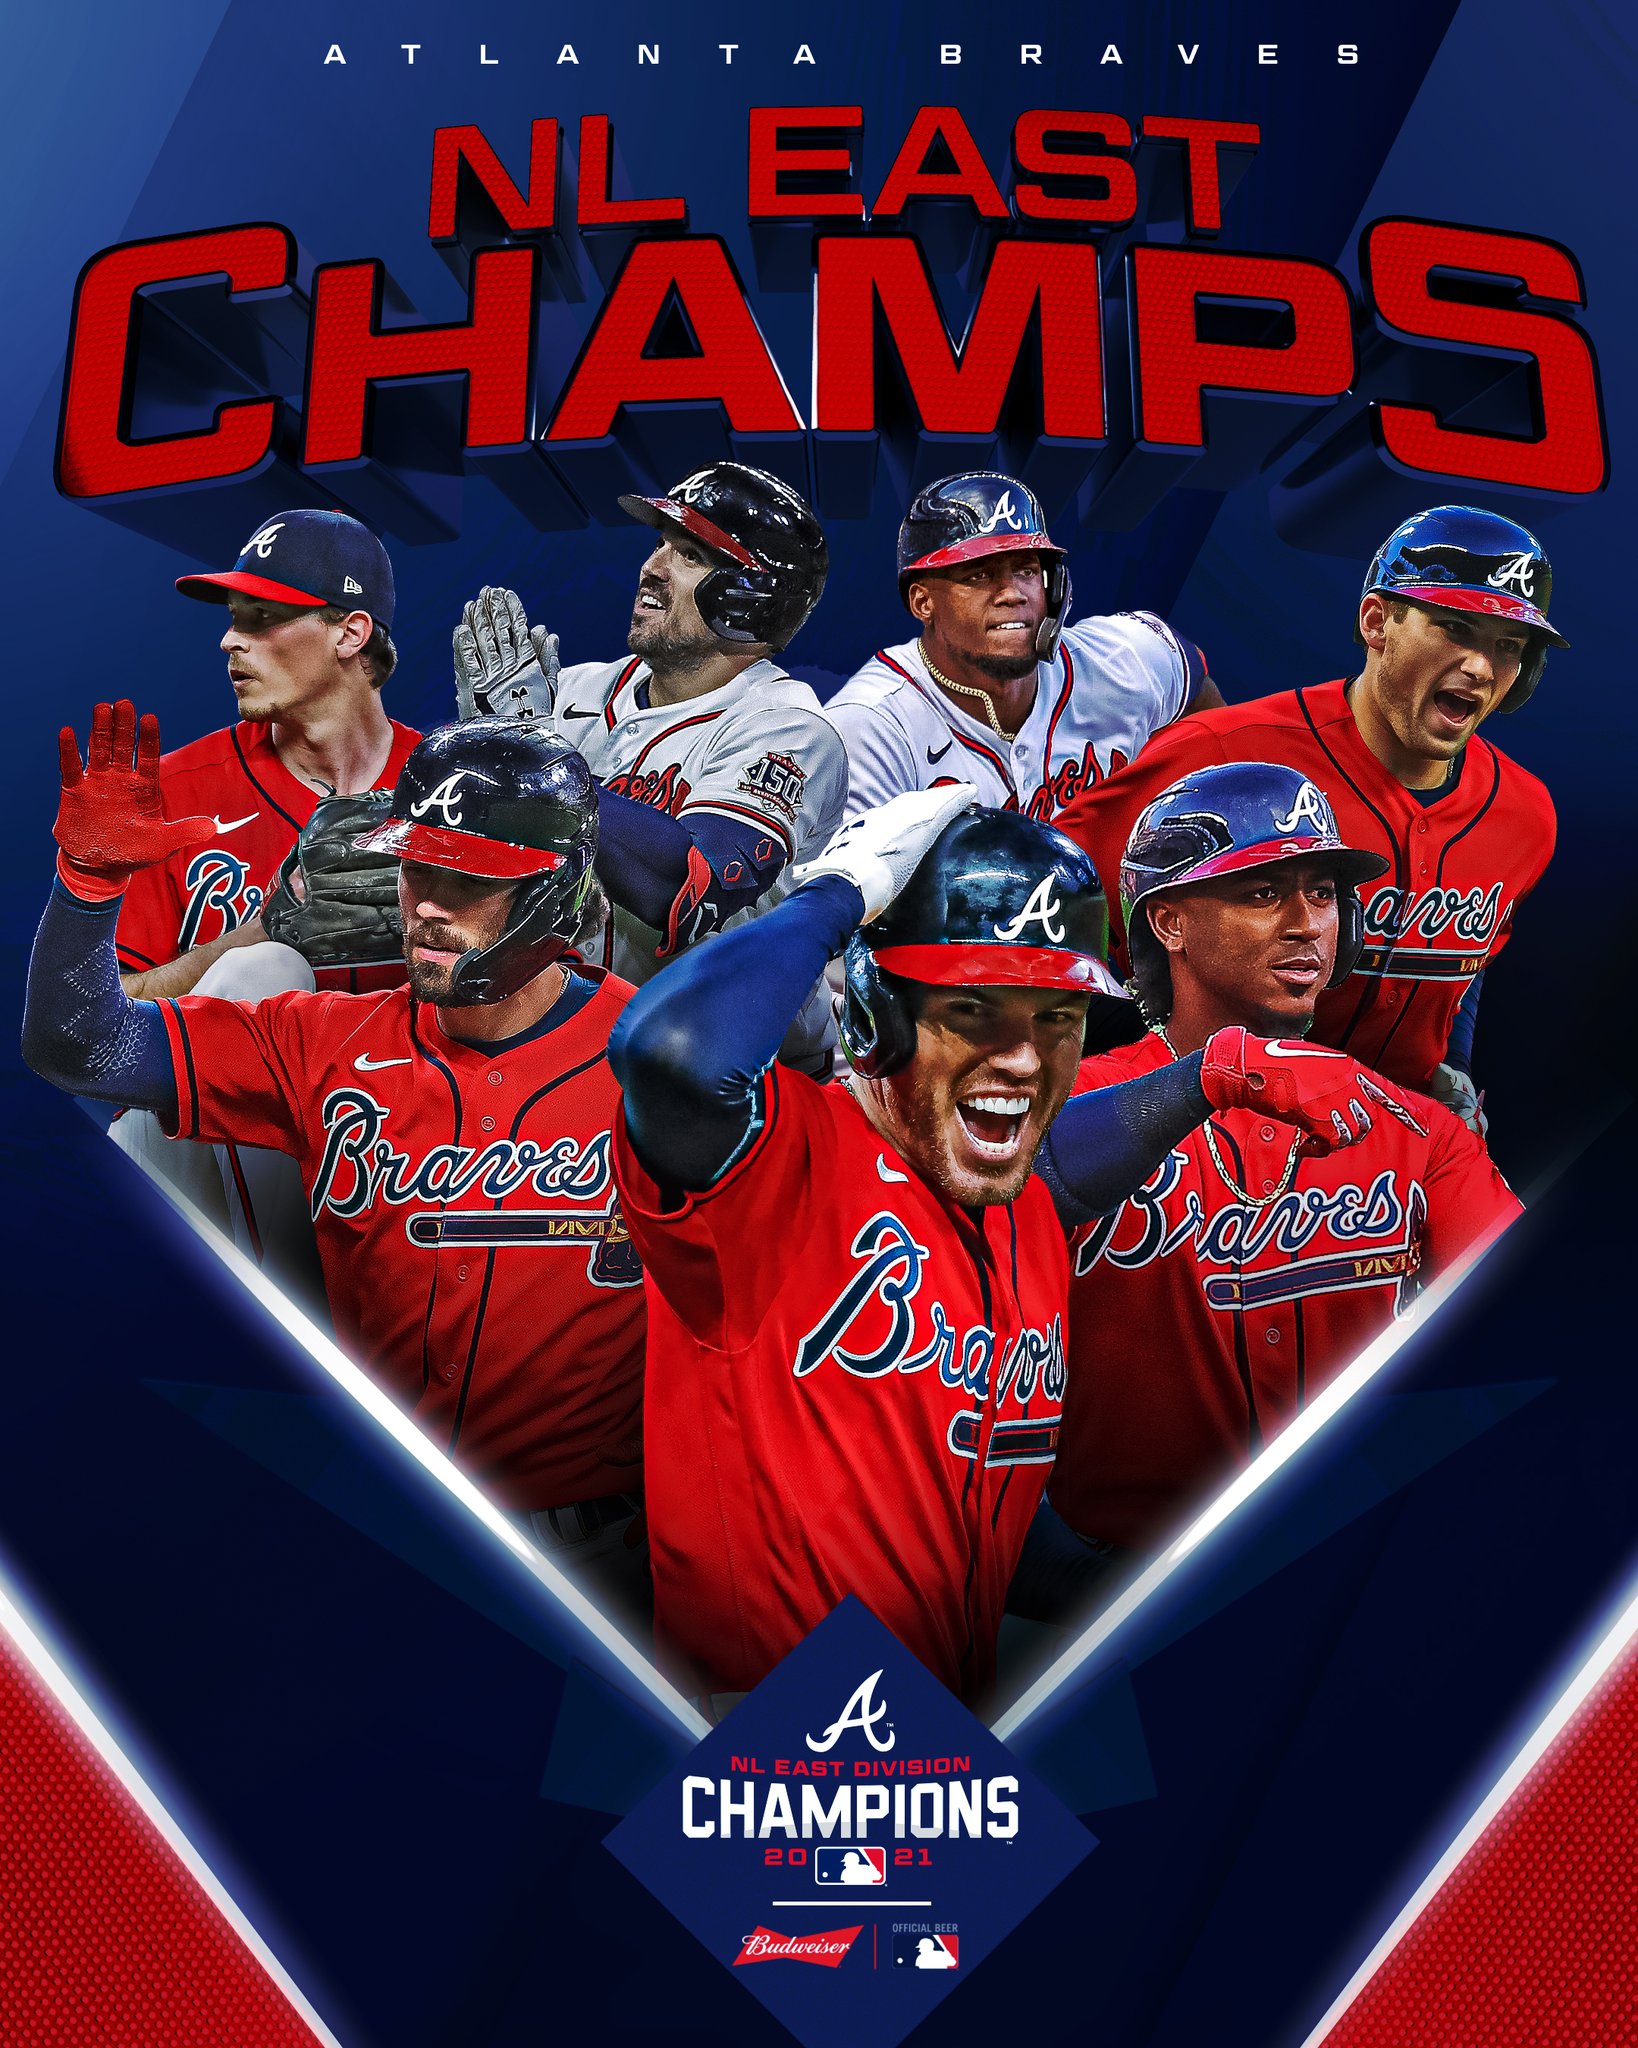 THE ATLANTA BRAVES ARE 2018 NATIONAL LEAGUE EAST CHAMPIONS‬